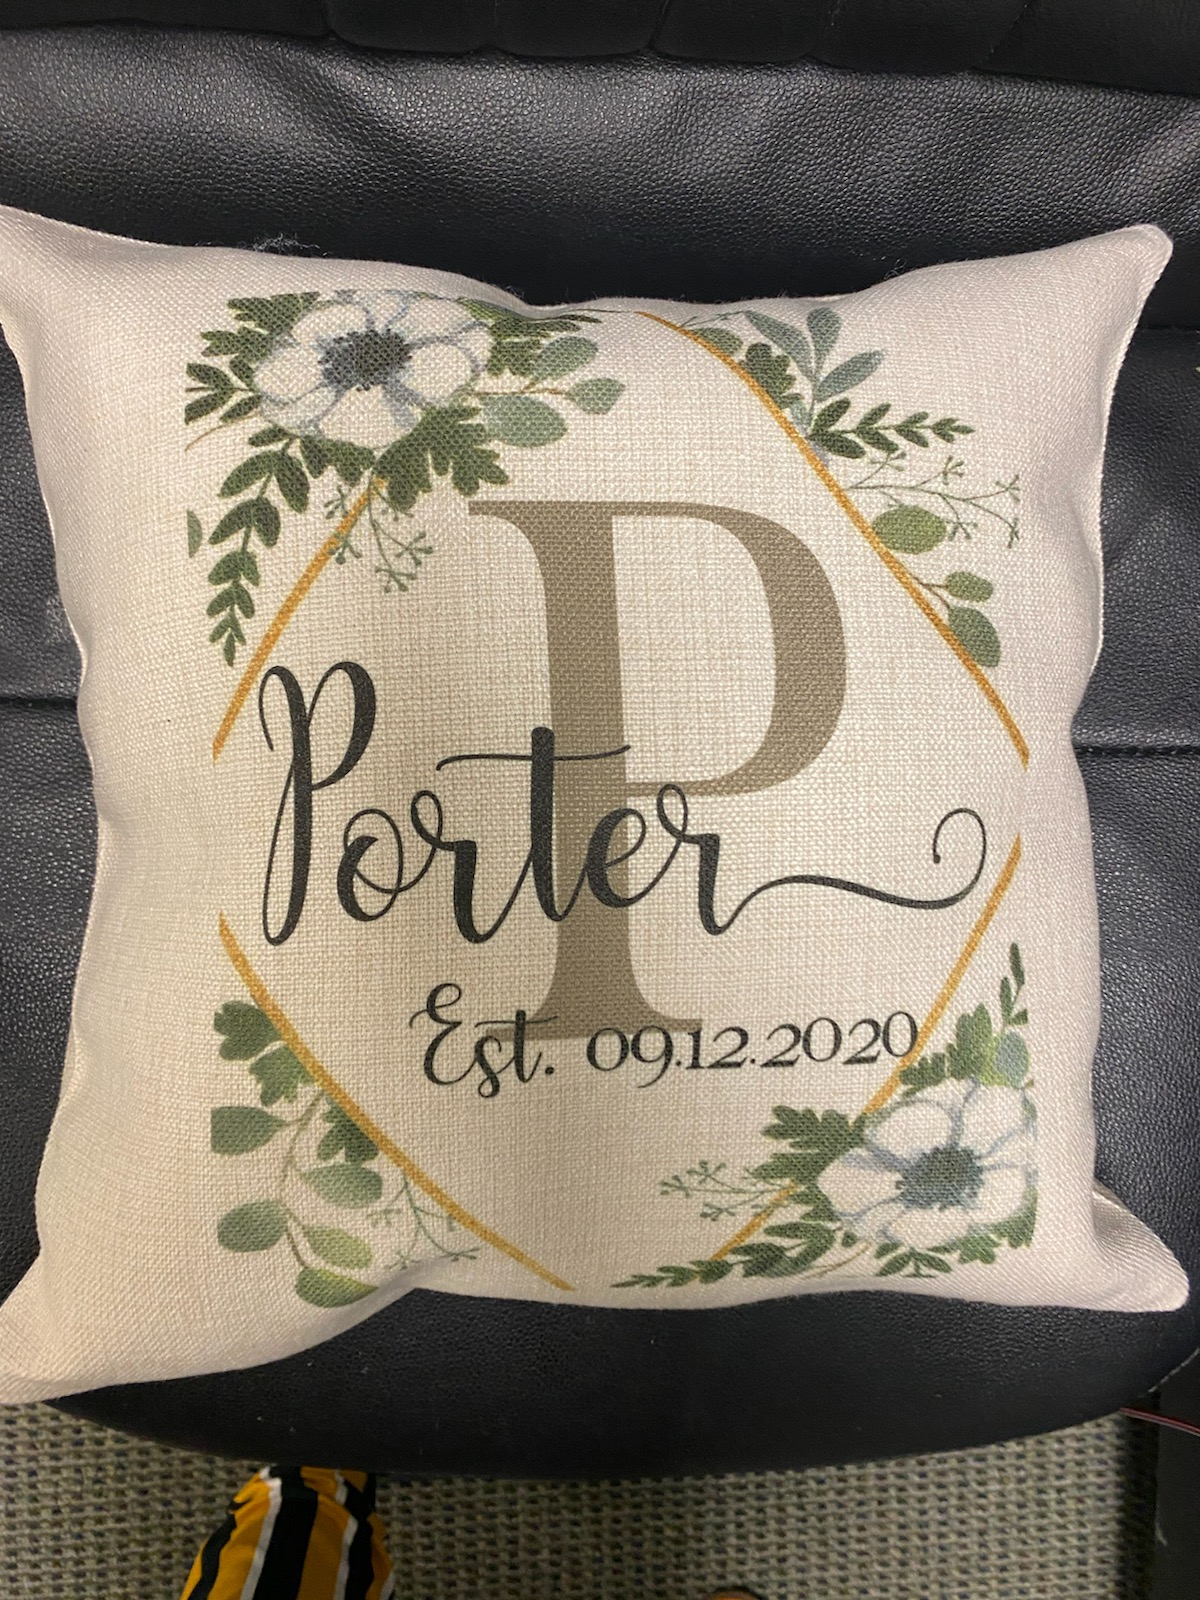 Established Pillow made with sublimation printing